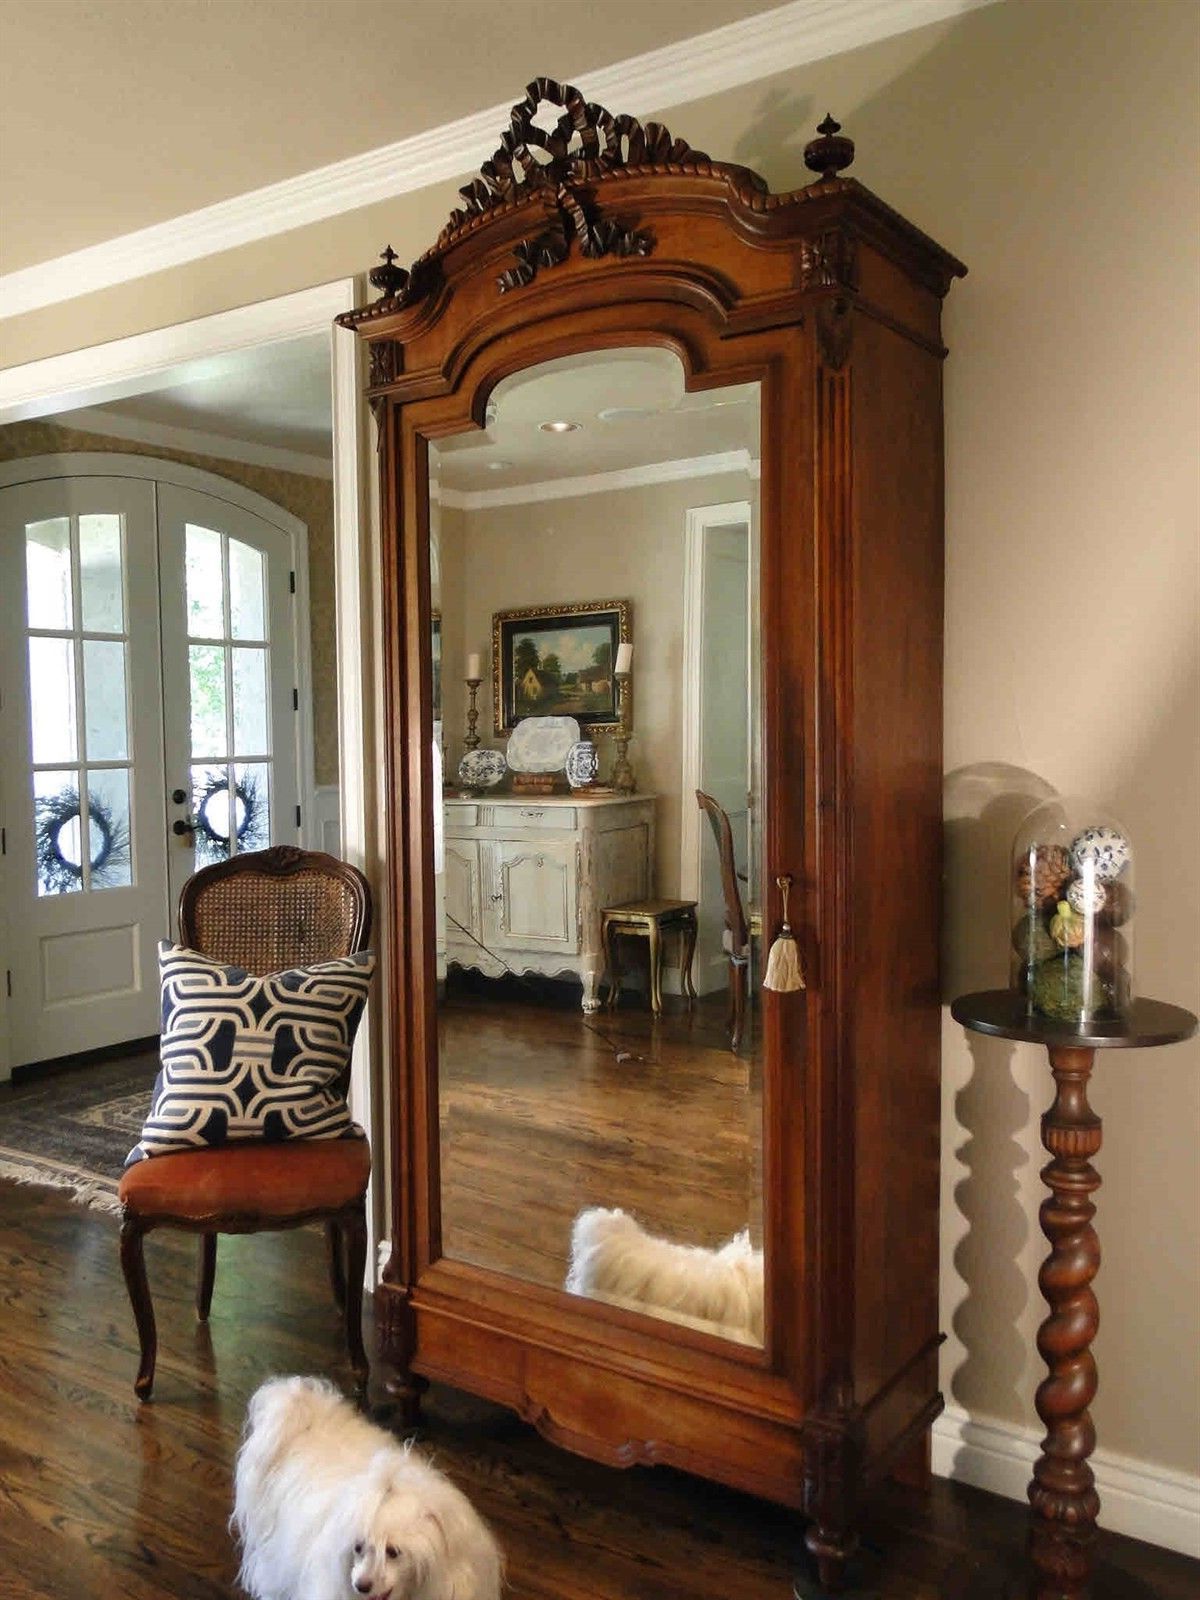 Antique French Armoire Wardrobe Bow Carving Mirrored Door Key Fitted Inside Throughout French Style Armoires Wardrobes (View 13 of 20)